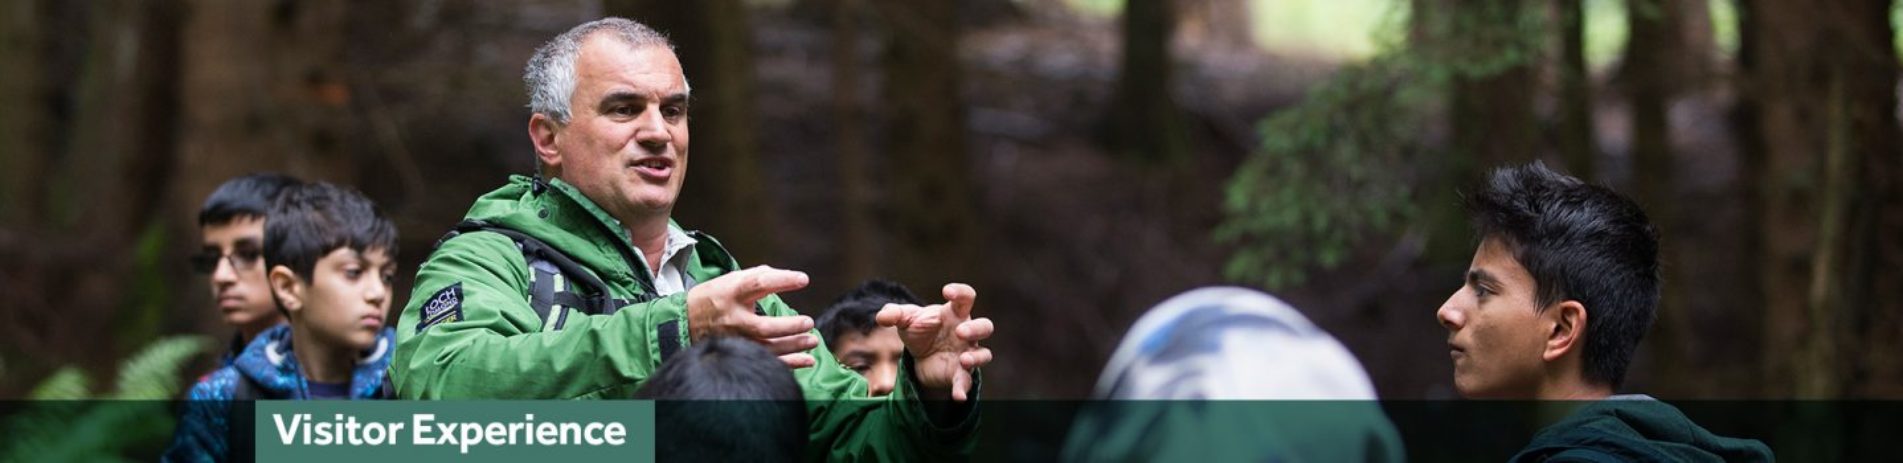 national-park-ranger-in-green-jacket-demonstrates-something-using-his-hands-in-front-of-school-students-in-forest-with-green-banner-underneath-reading-visitor-experience